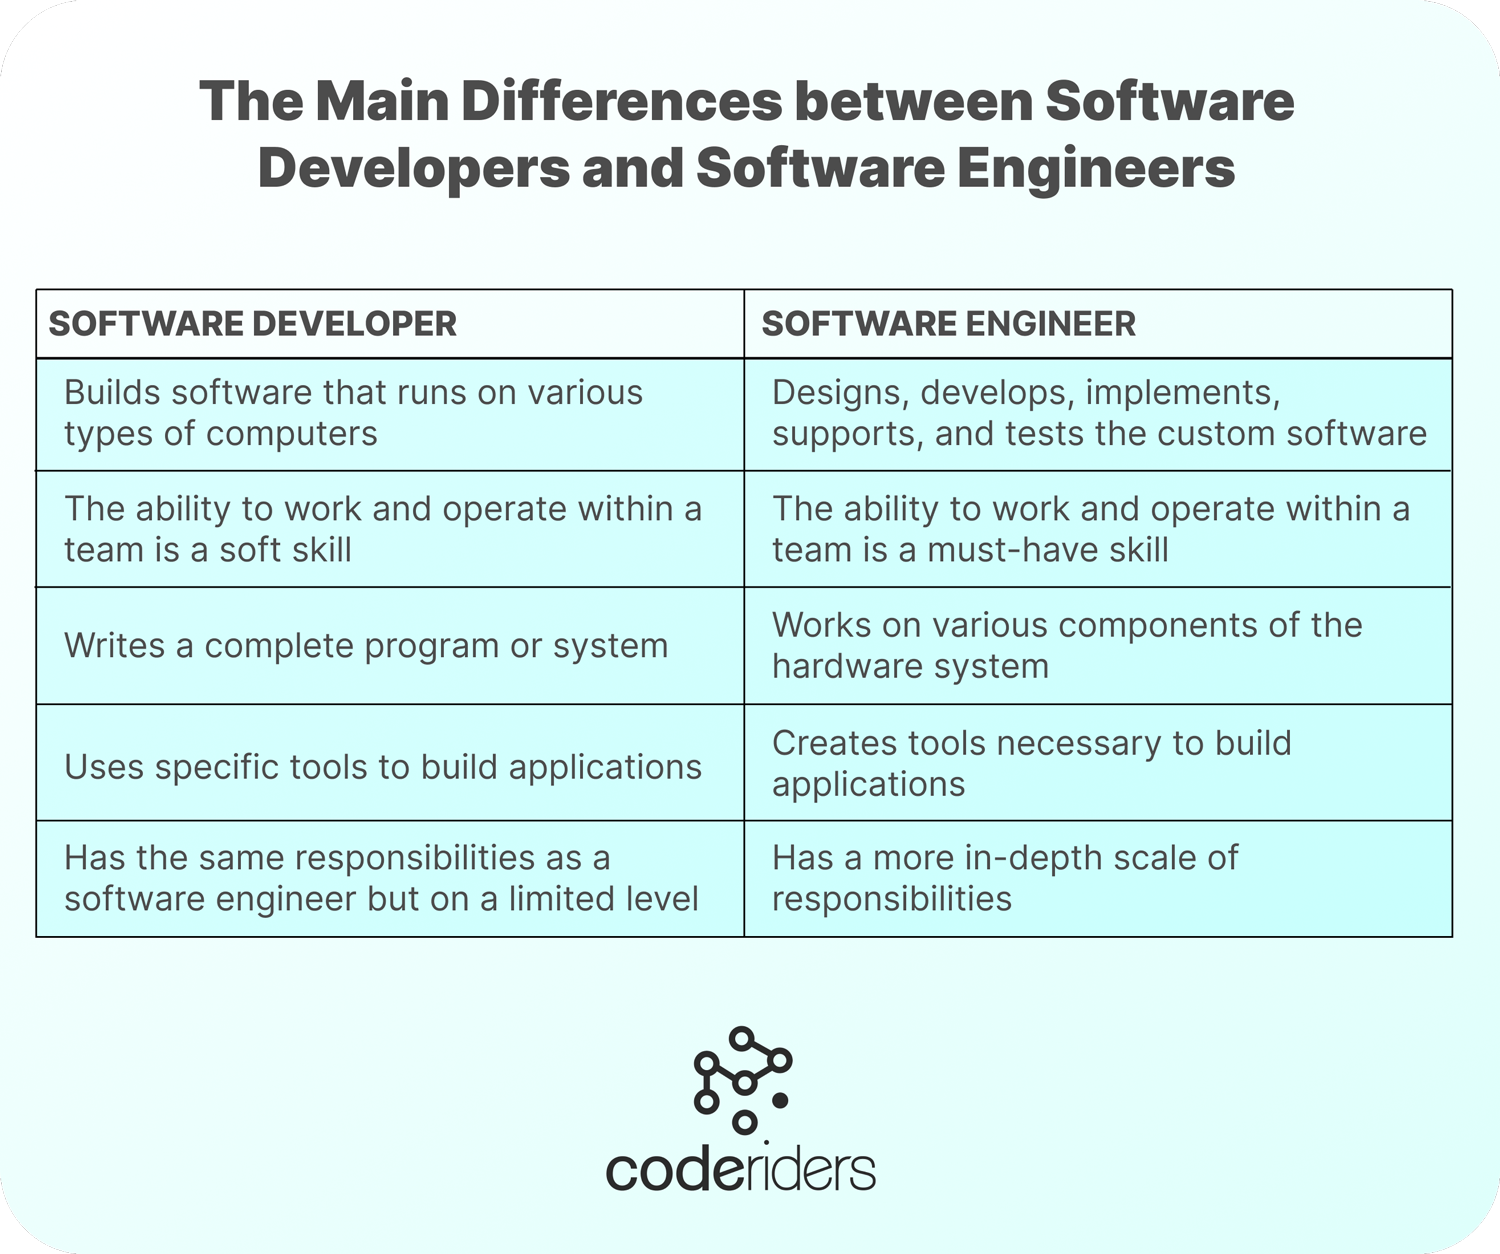 Software developers vs software engineers what is the difference between these two roles in software development teams